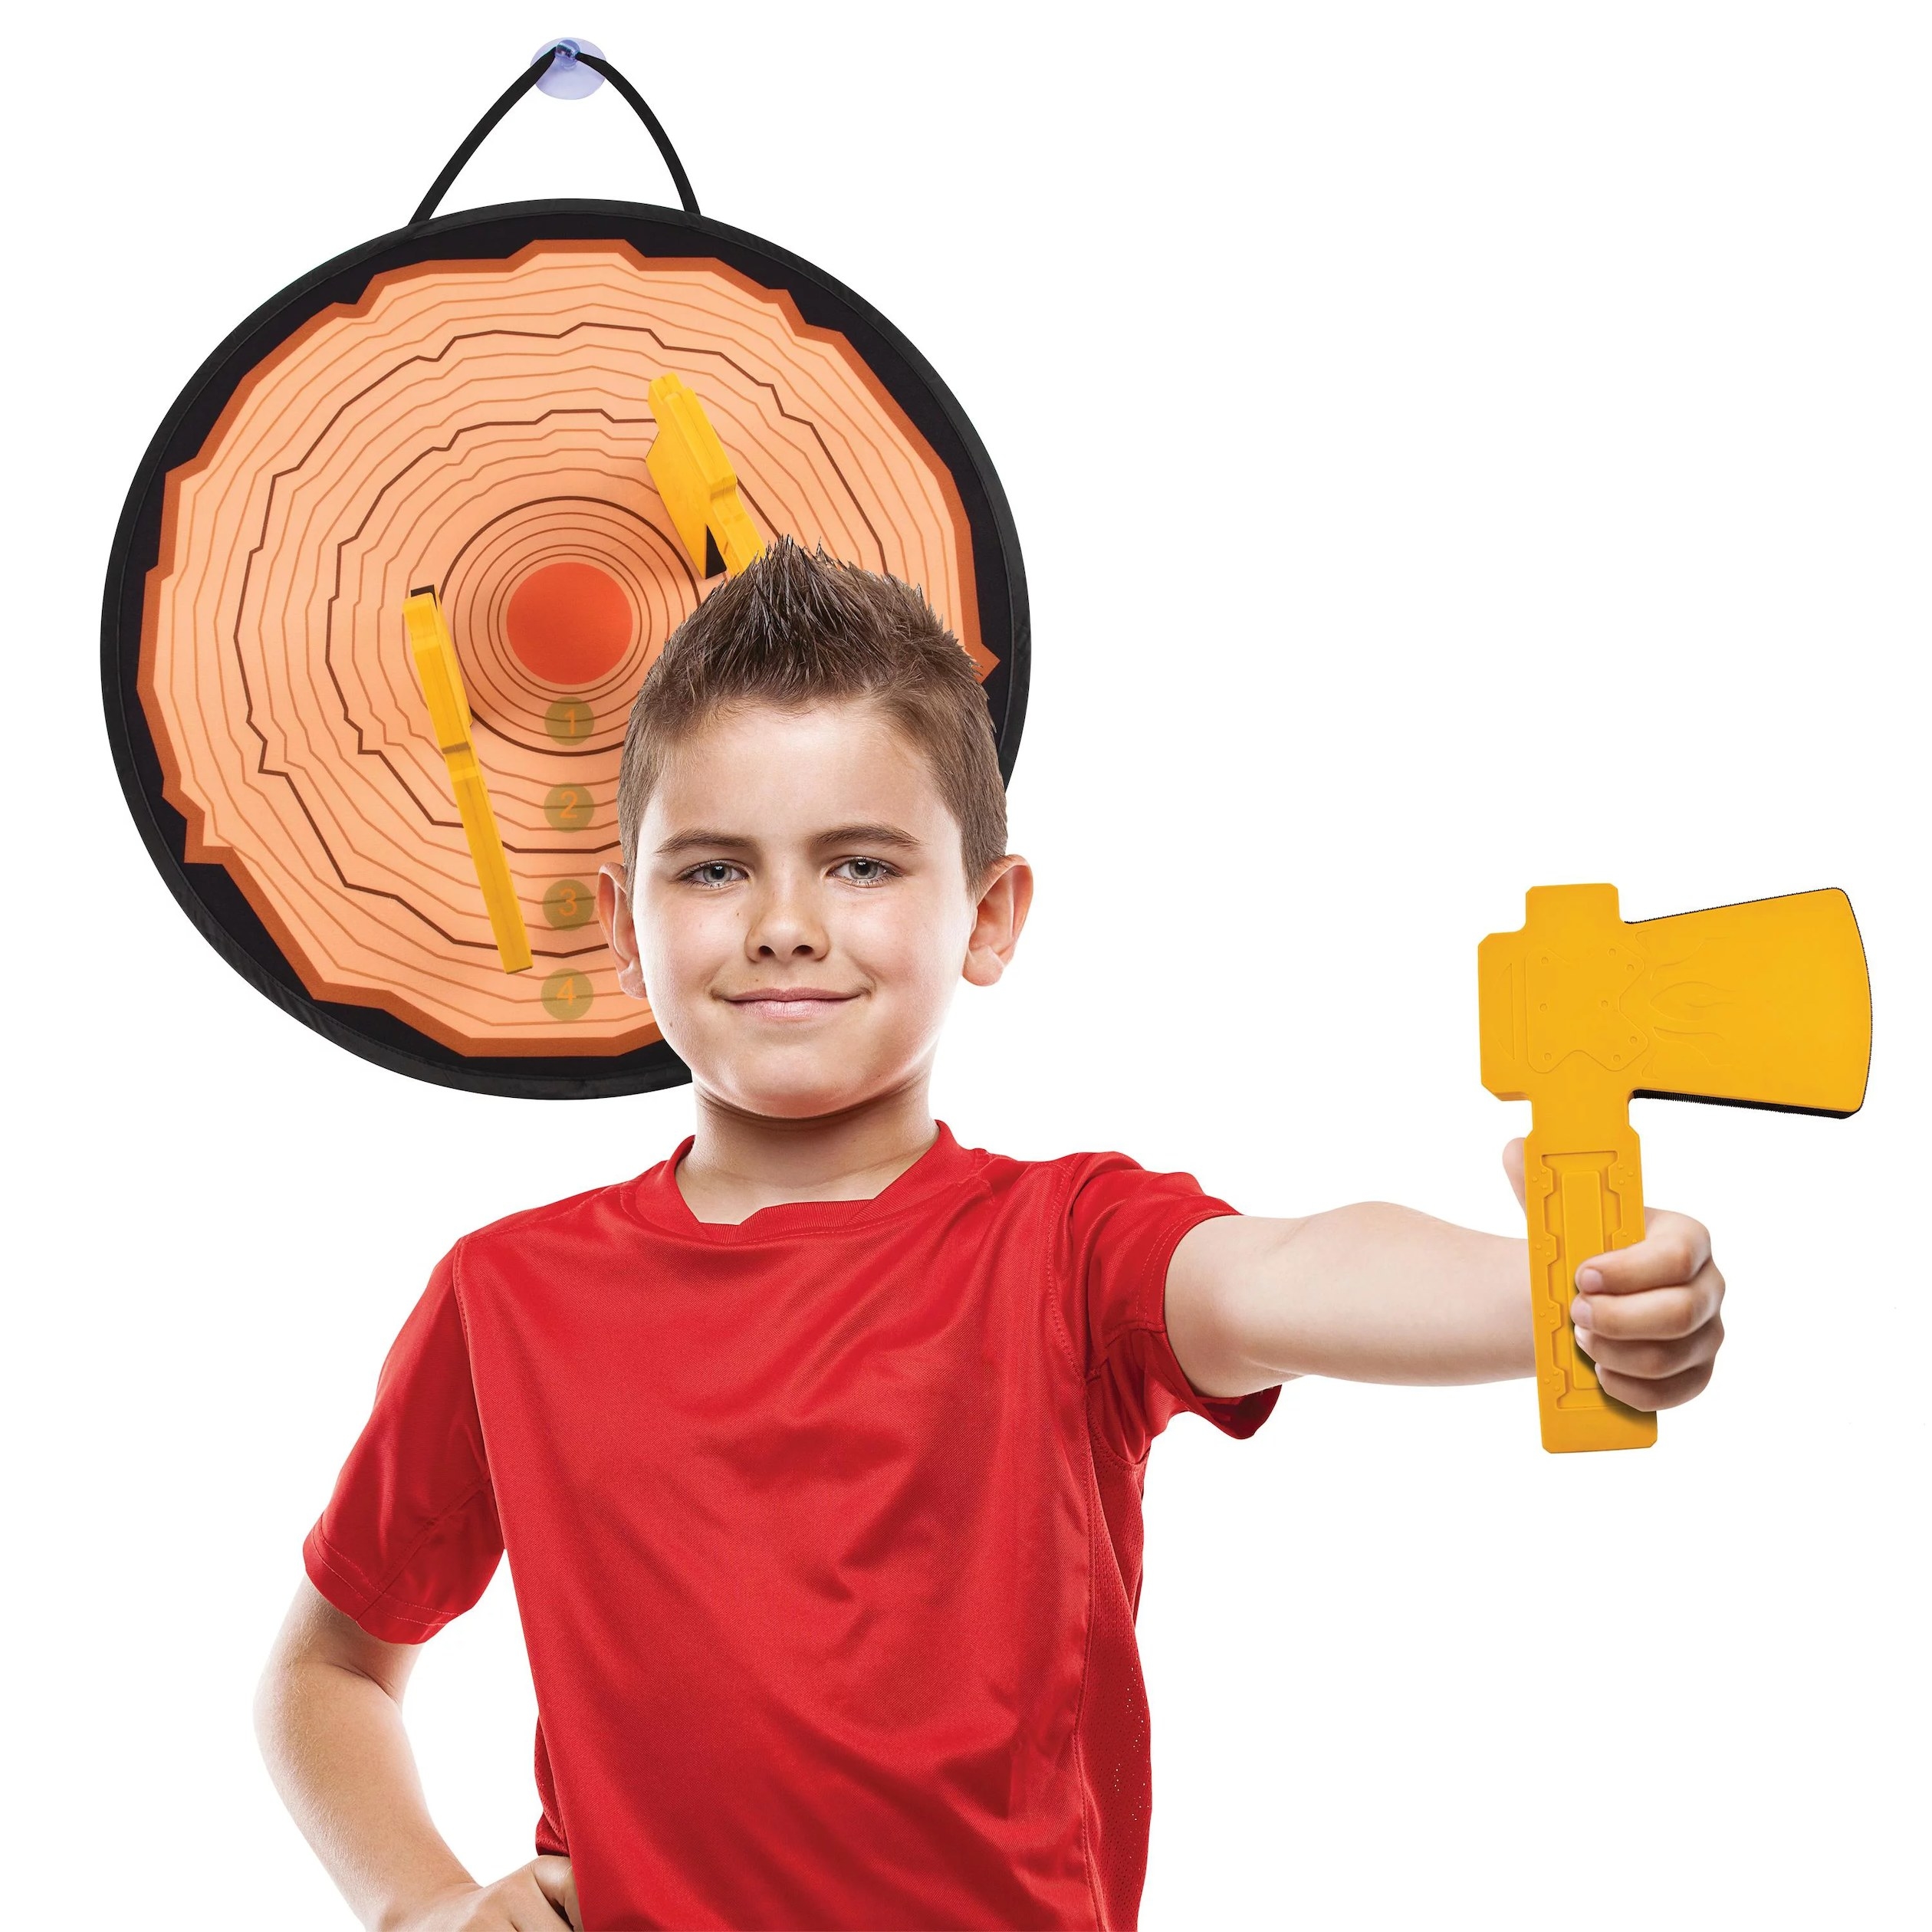 Boy holding axe in front of target